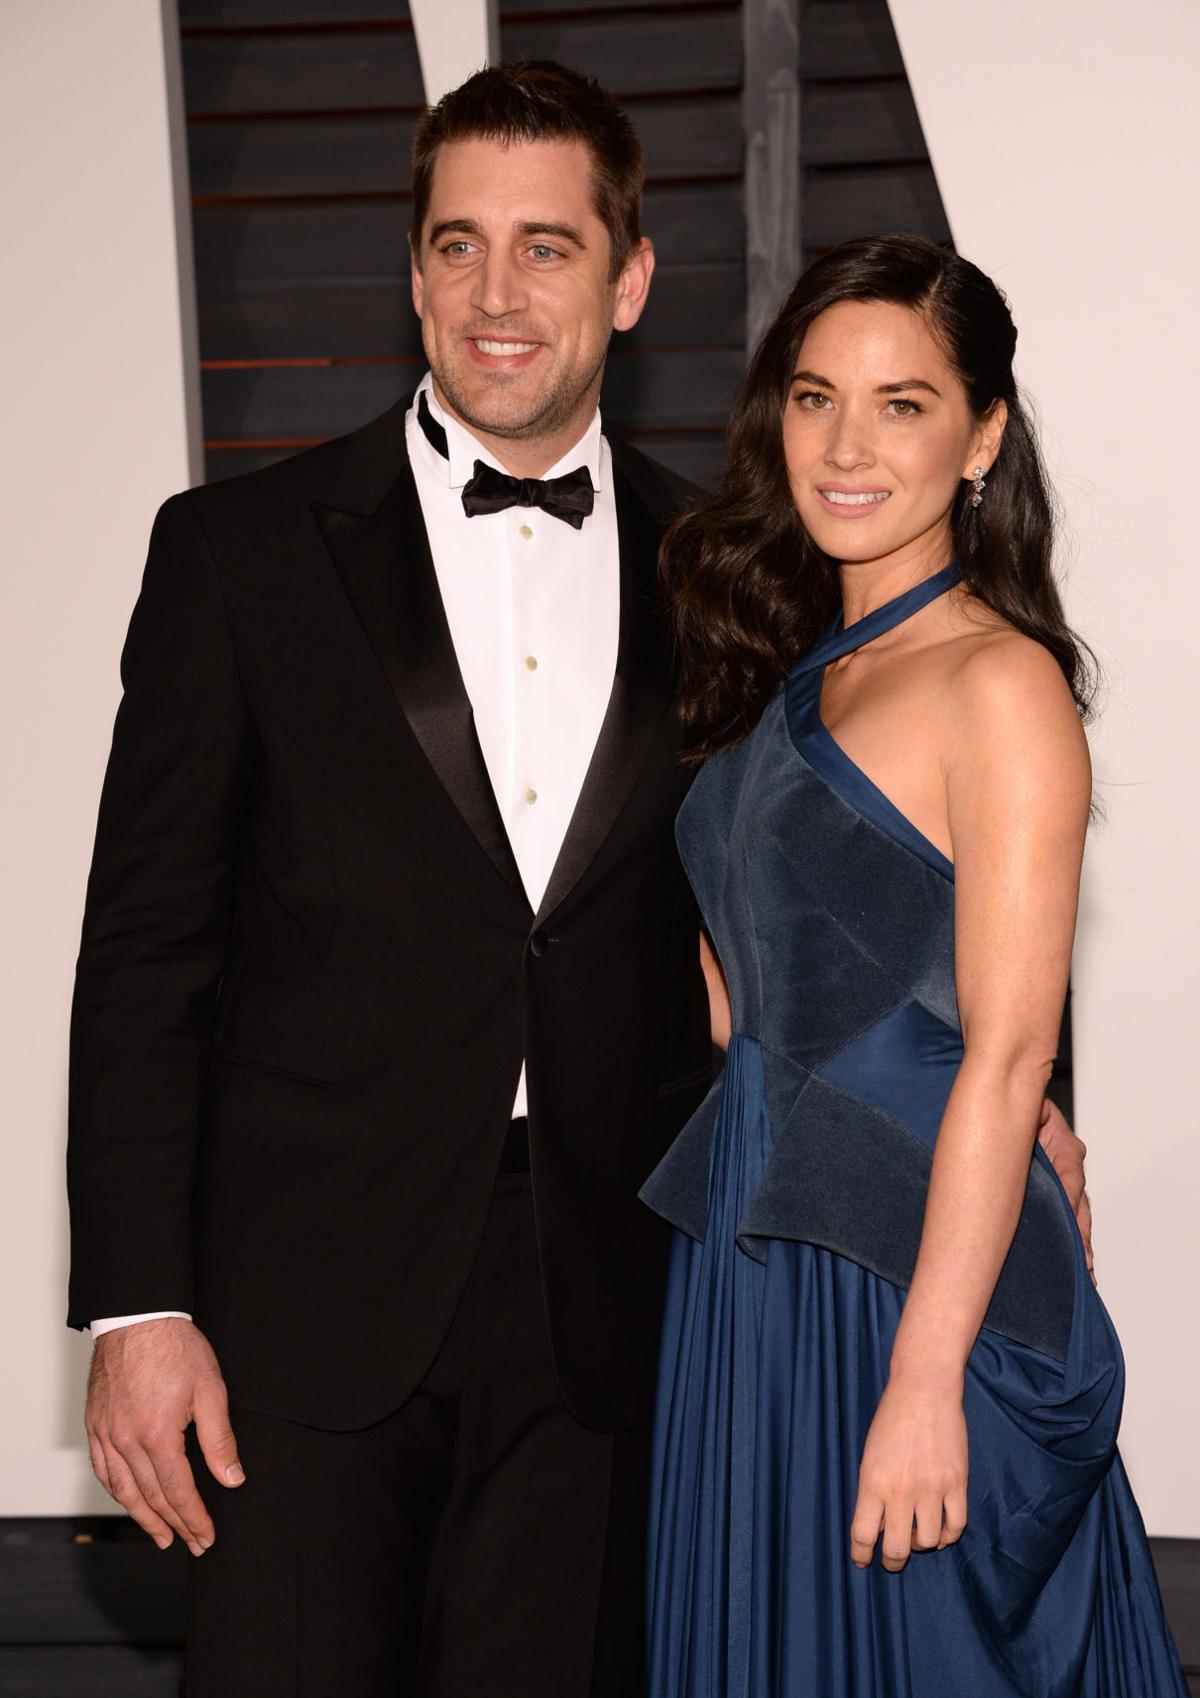 22 Times Aaron Rodgers And Olivia Munn Were Too Cute For